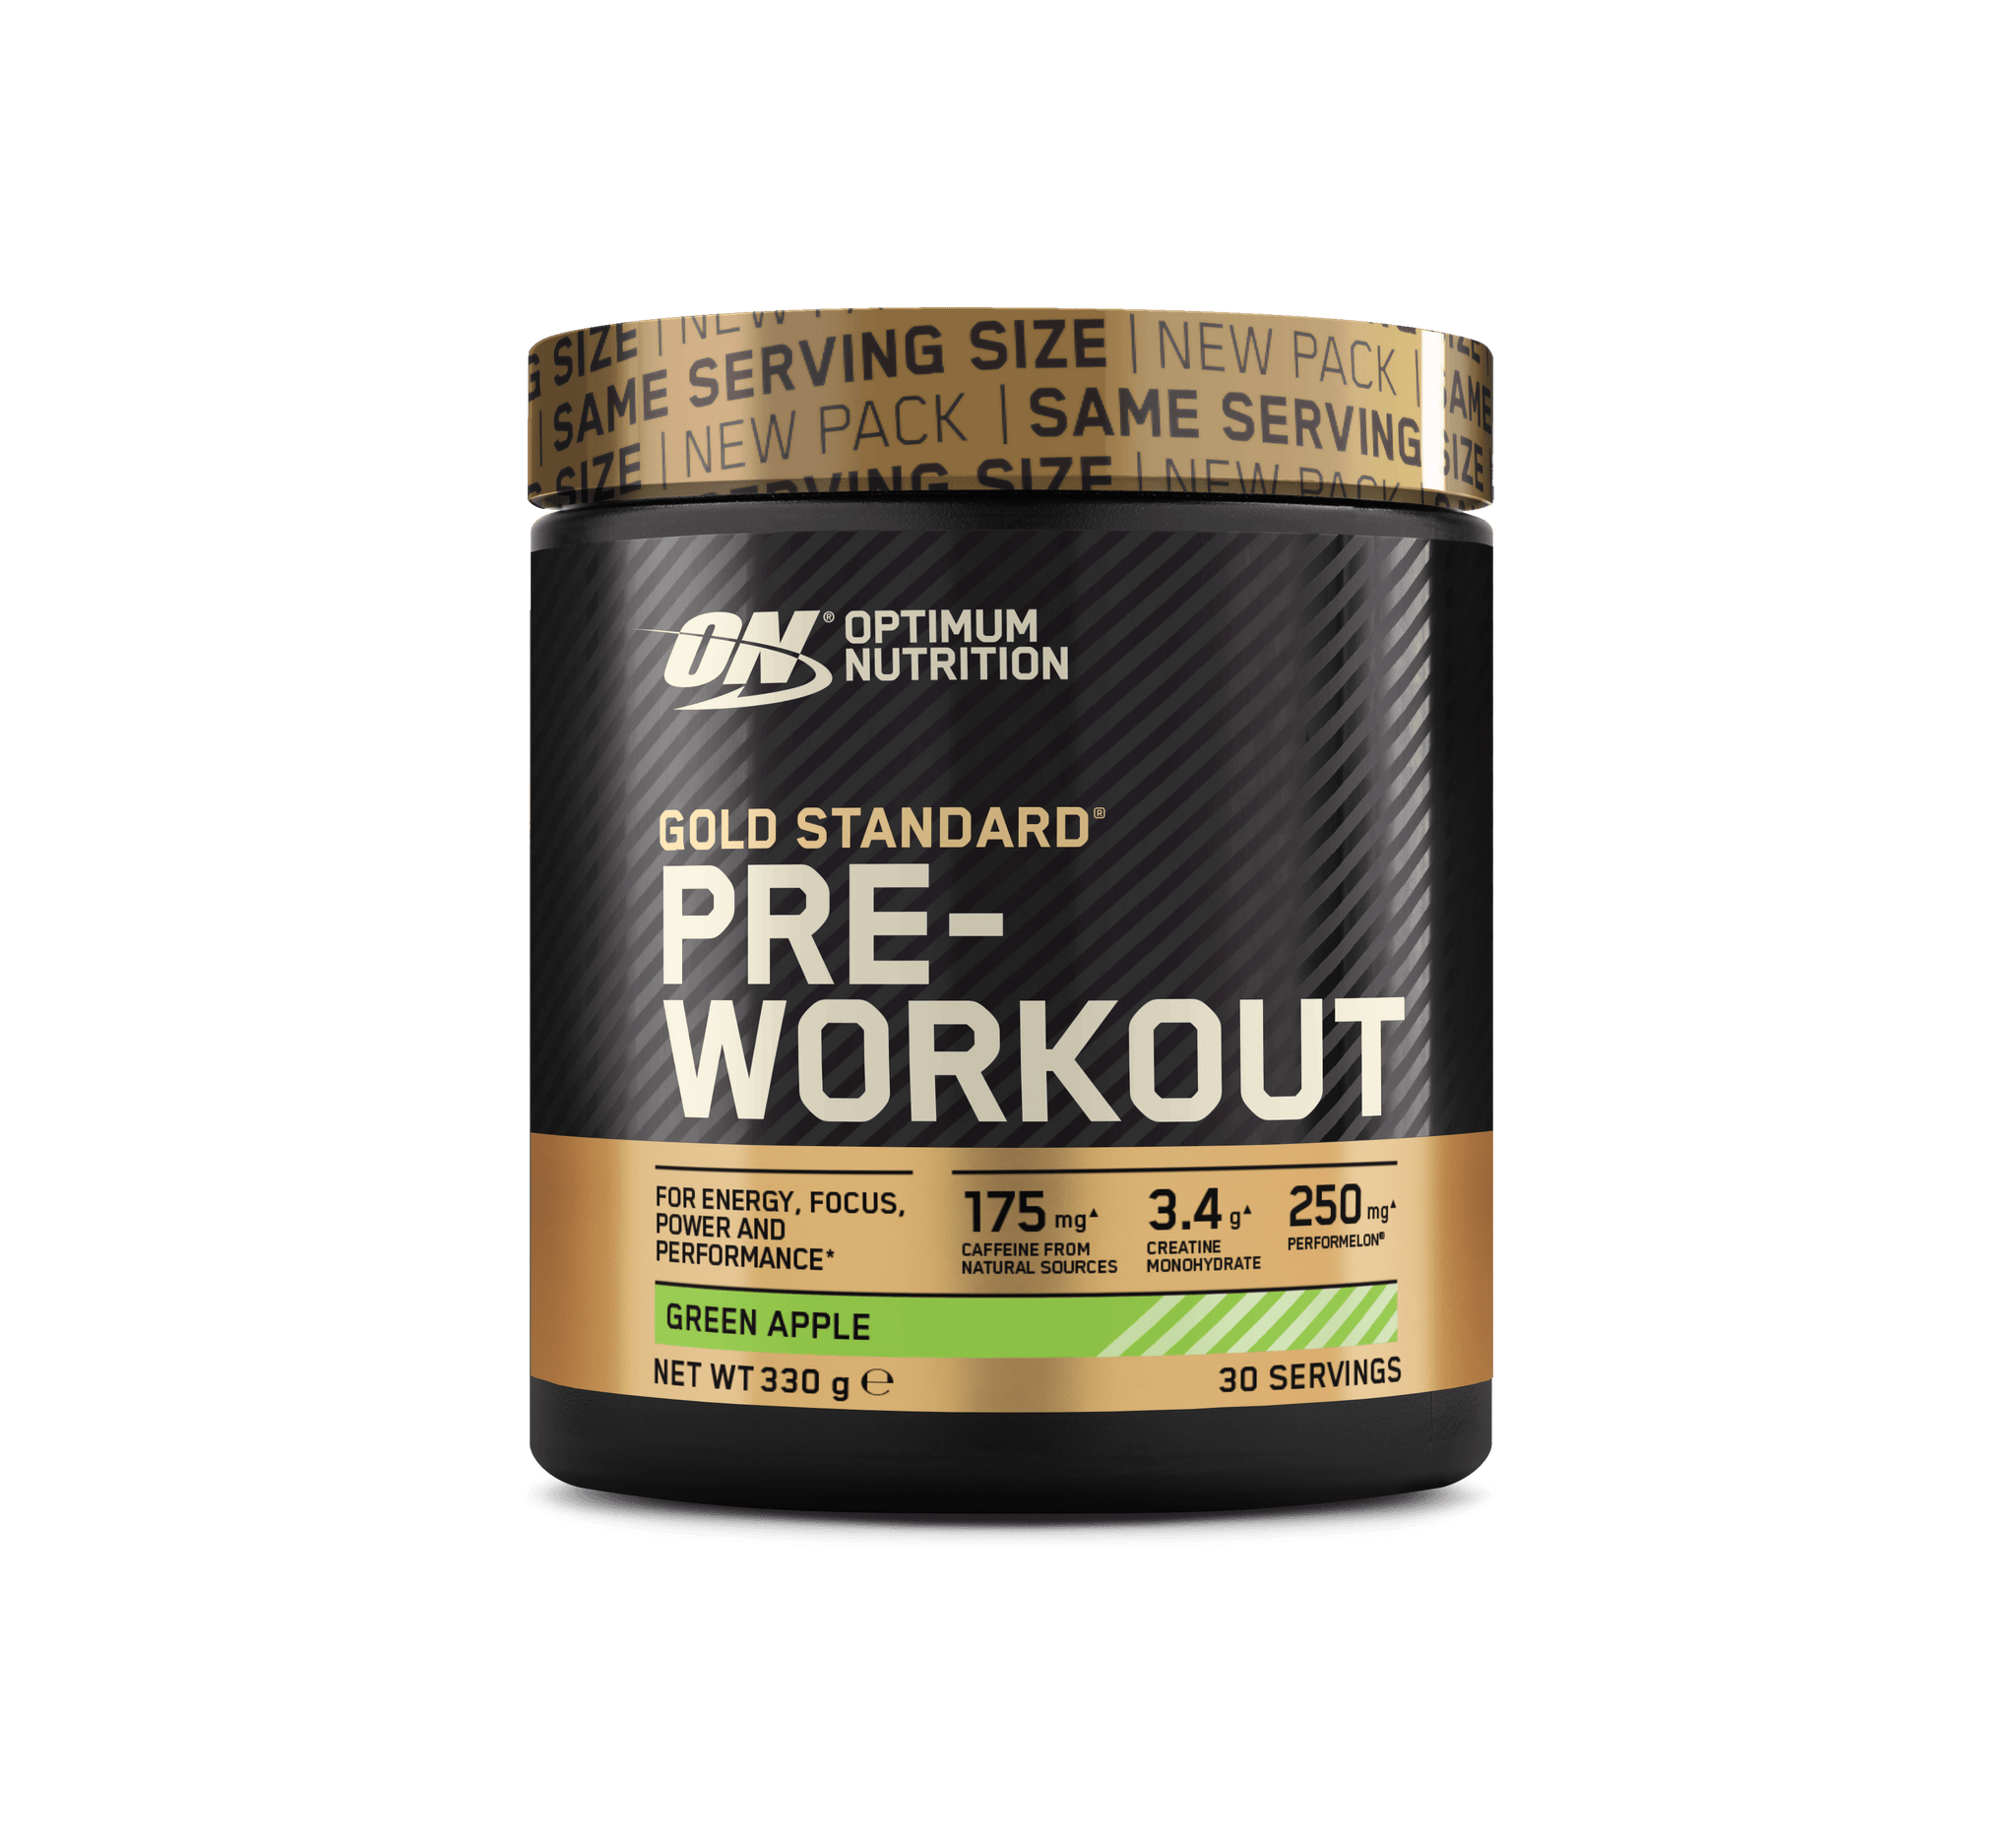 6 Day Gold standard pre workout ingredients for Push Pull Legs